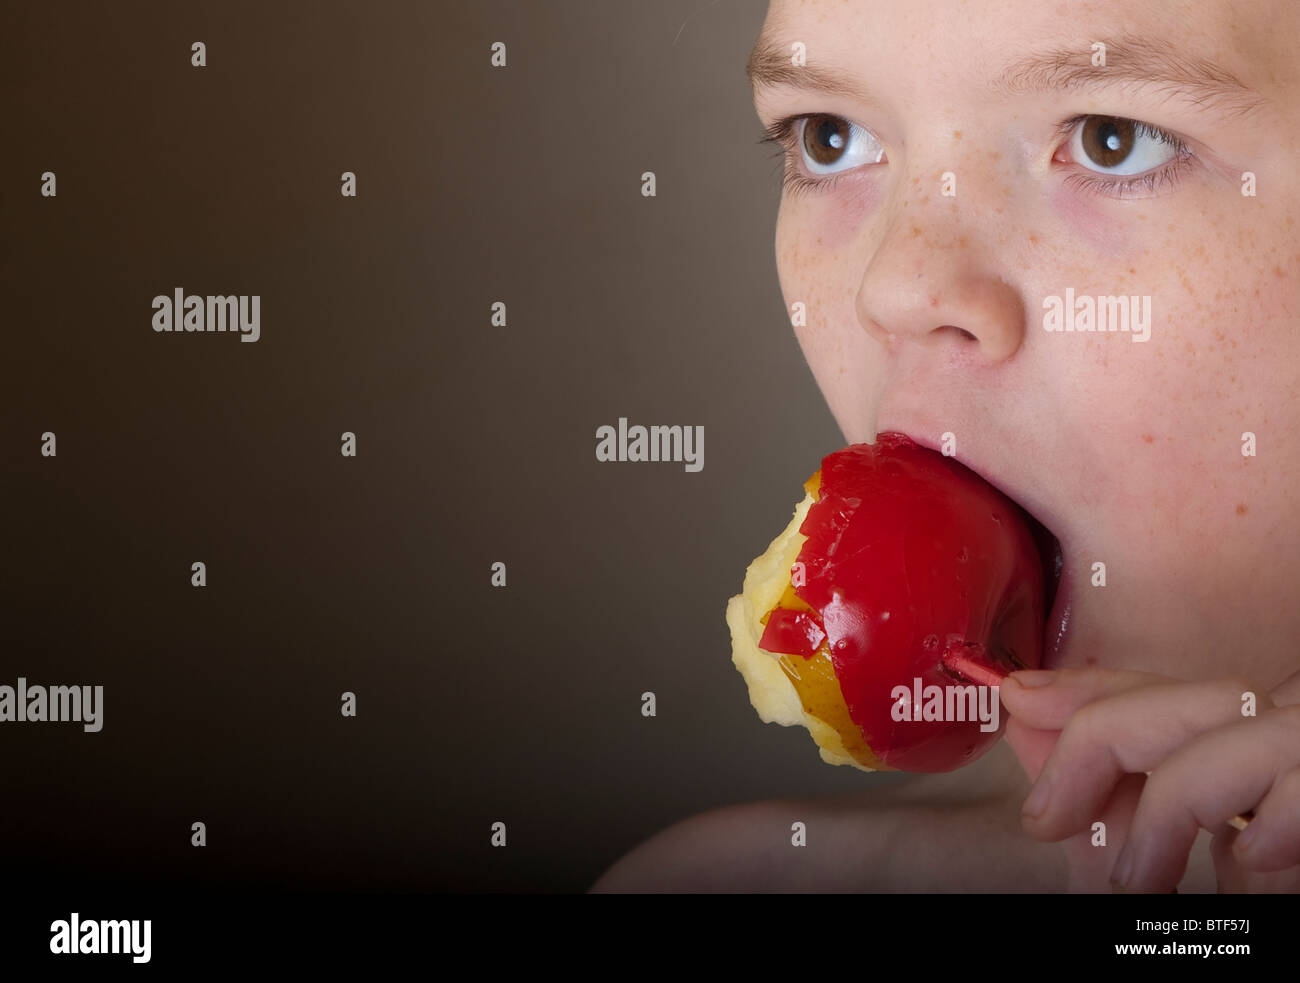 Child eating a toffee apple Stock Photo